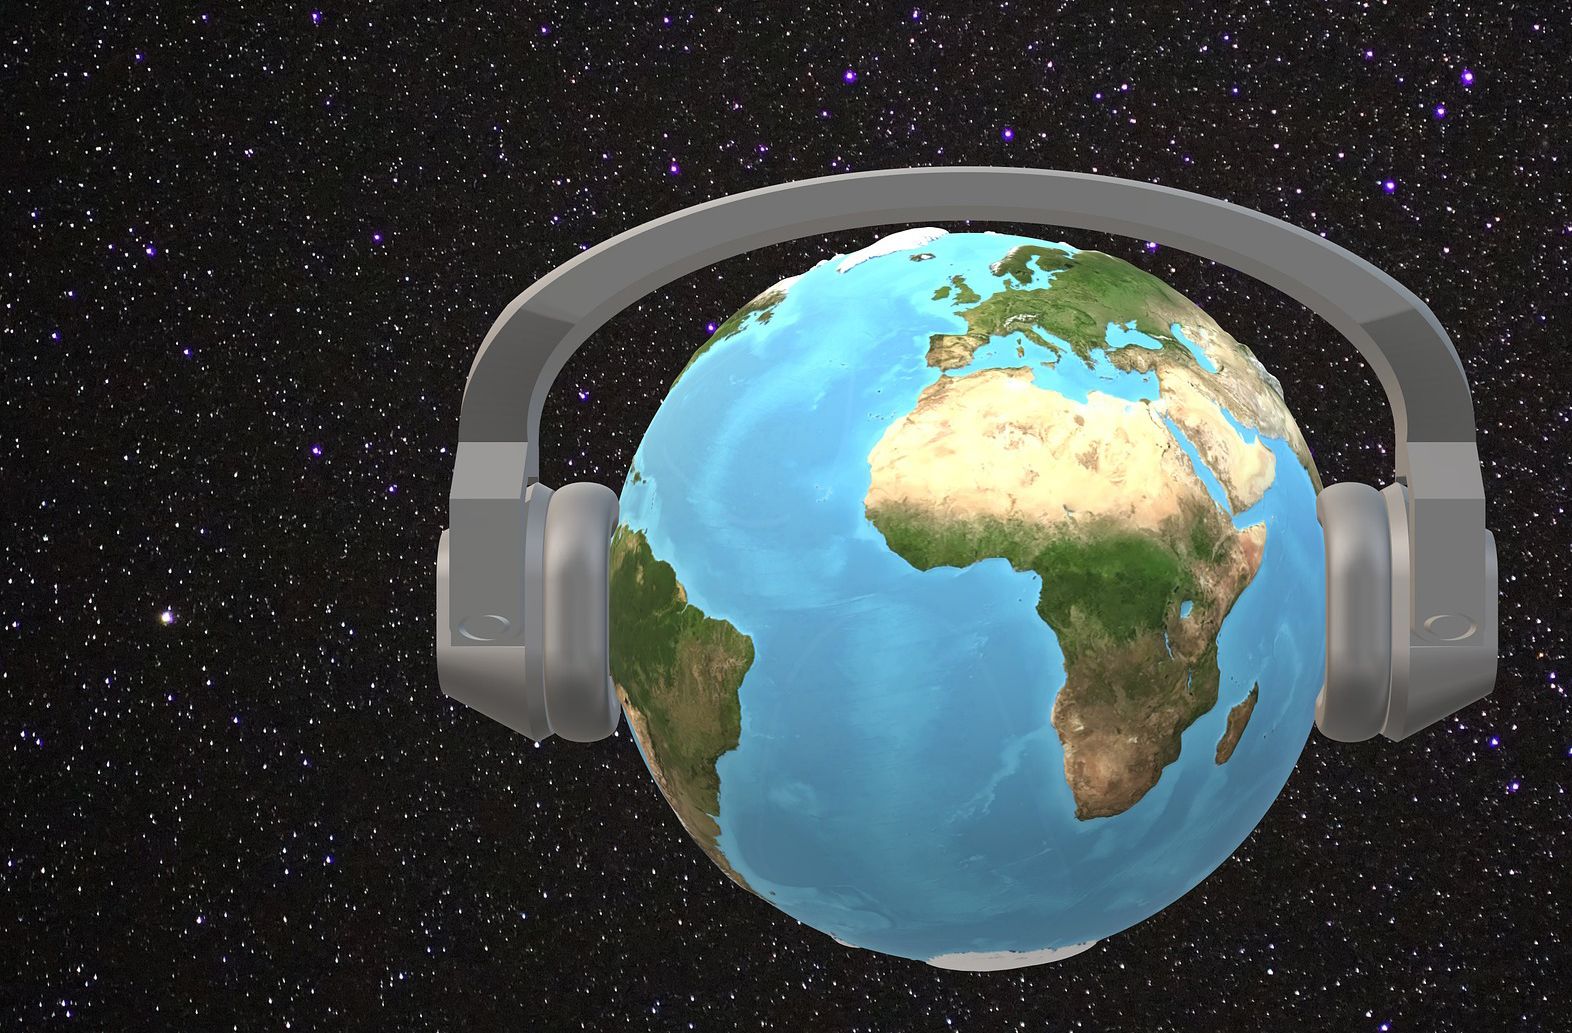 The World seen from space wearing headphones